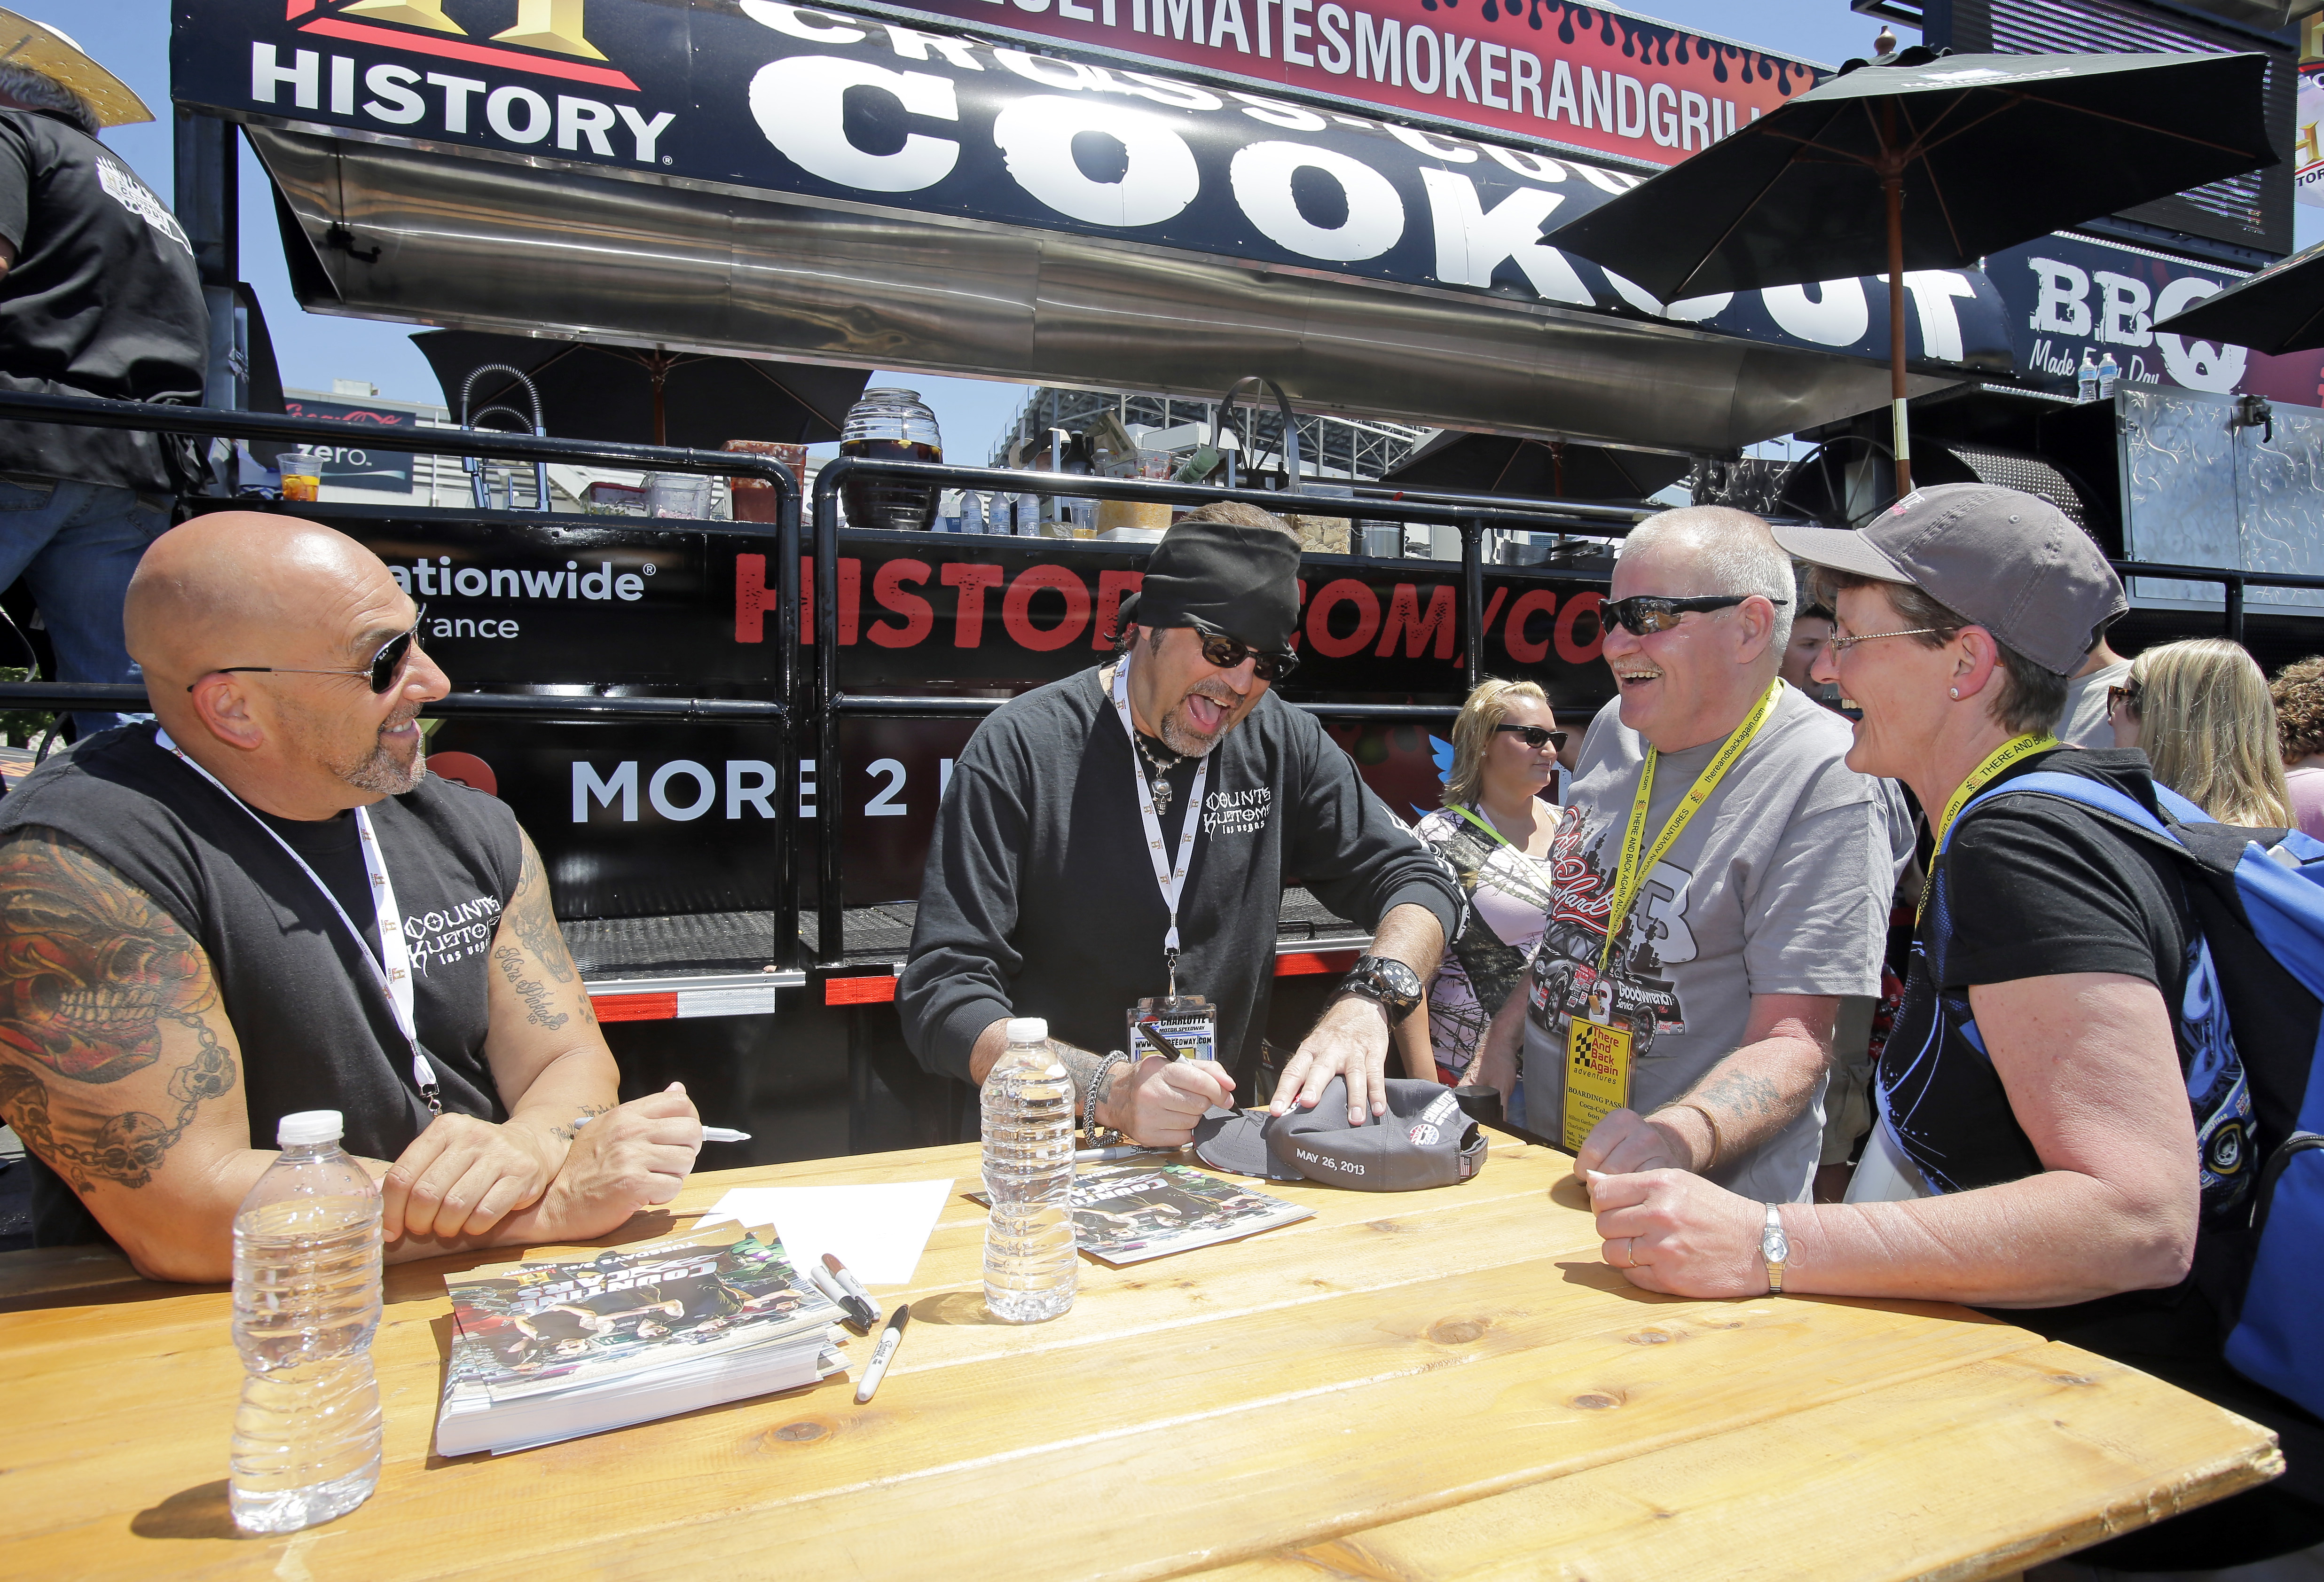 26 May 2013--History Channel Autograph Session at the Charlotte Motor Speedway in Concord, NC.(HHP/Alan Marler)